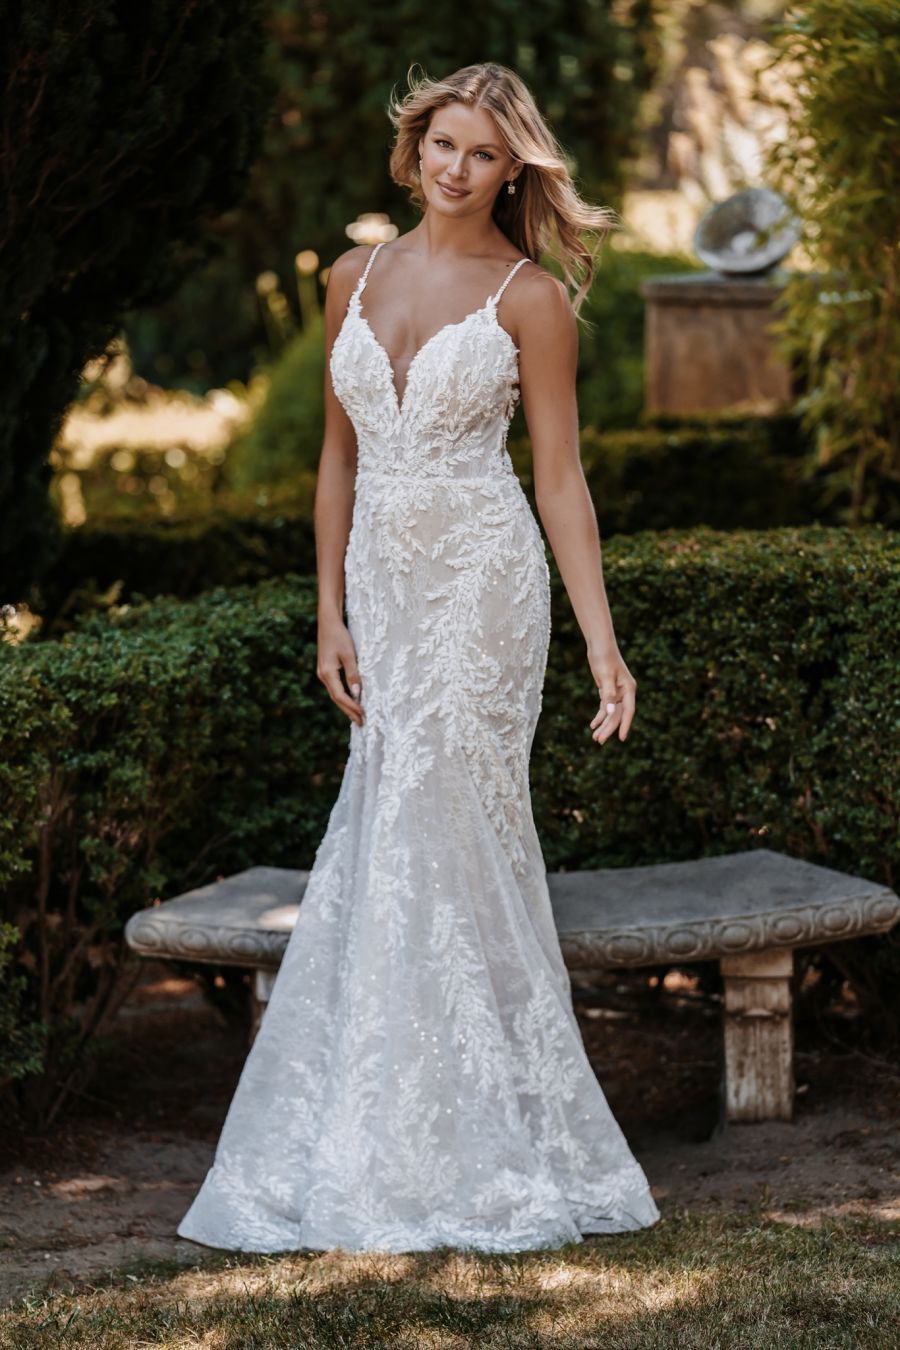 Sheath Wedding Dress With V-neckline And Stitched Lace | Kleinfeld 